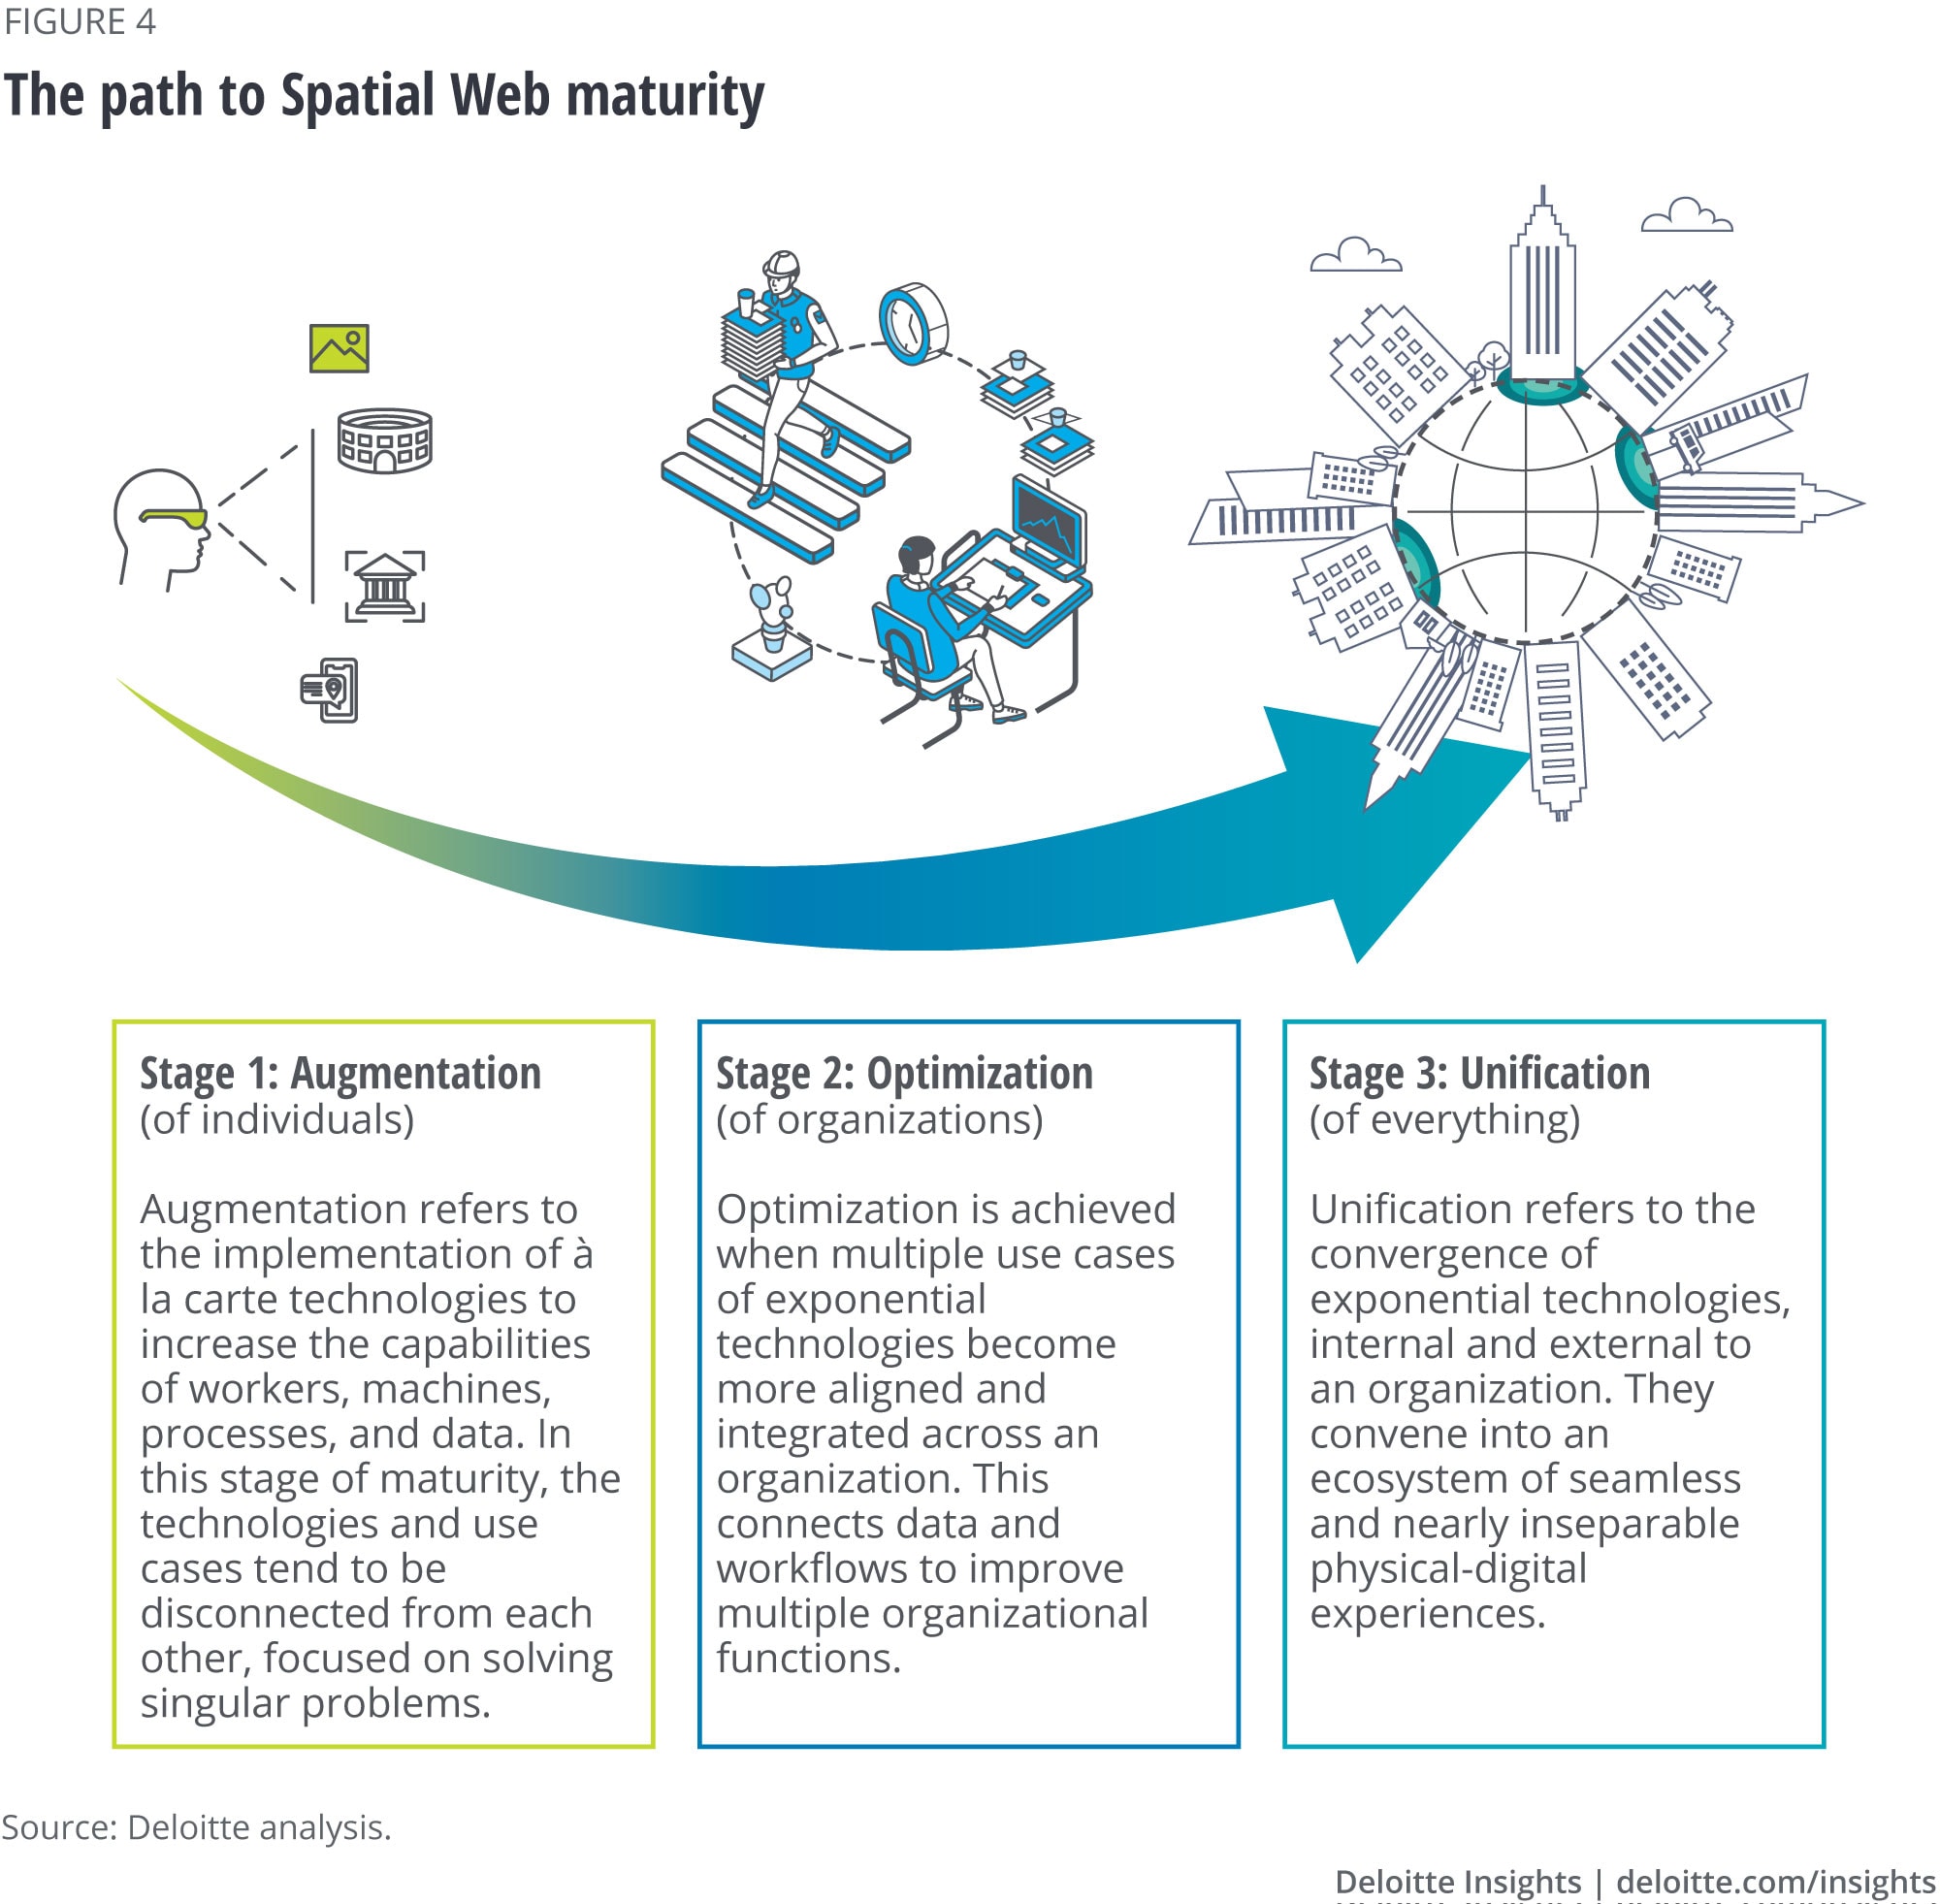 The path to Spatial Web maturity